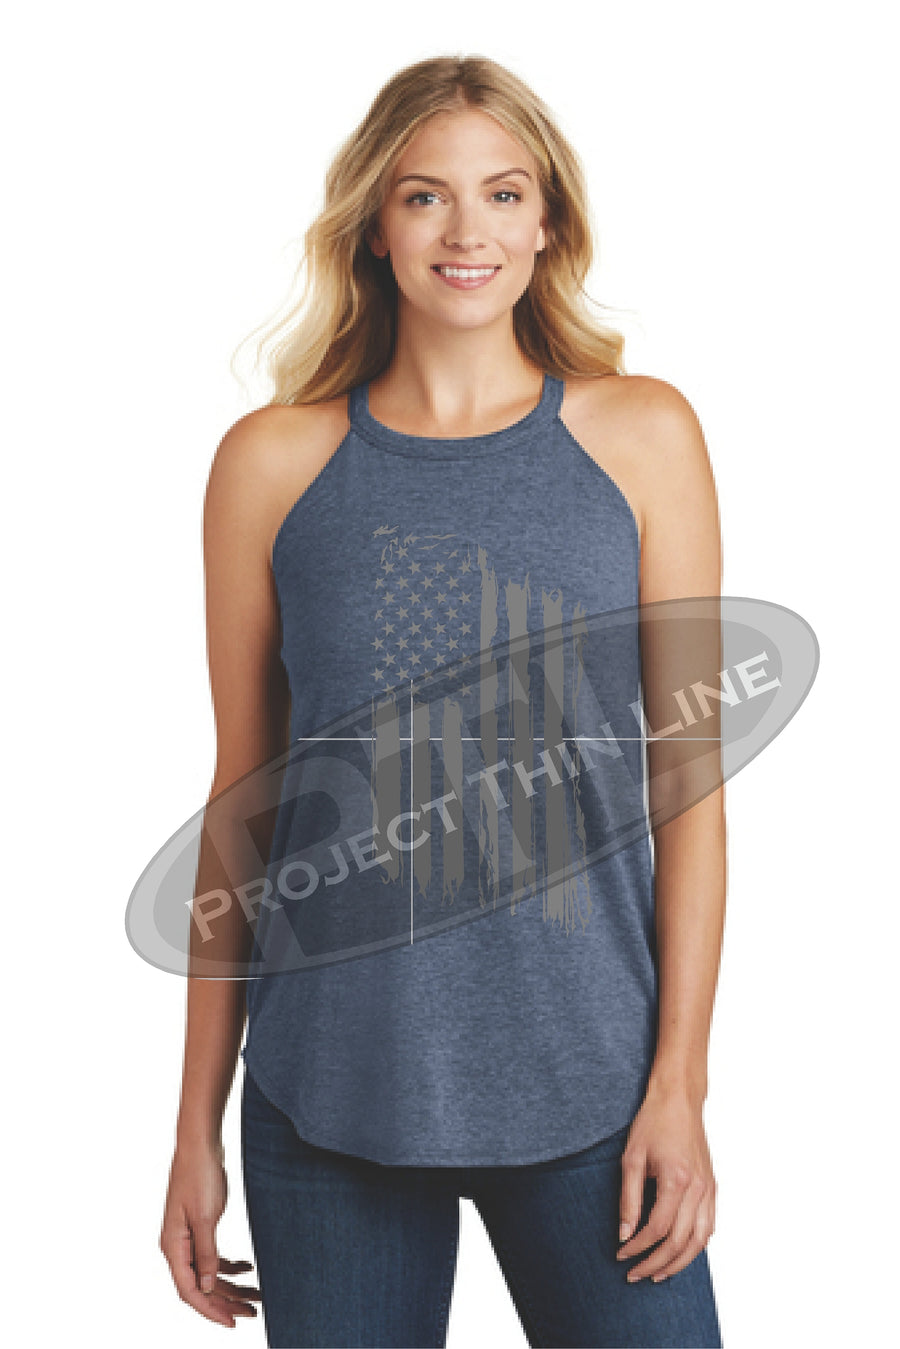 OD Green Tattered Tactical - Subdued American Flag Rocker Tank Top - FRONT